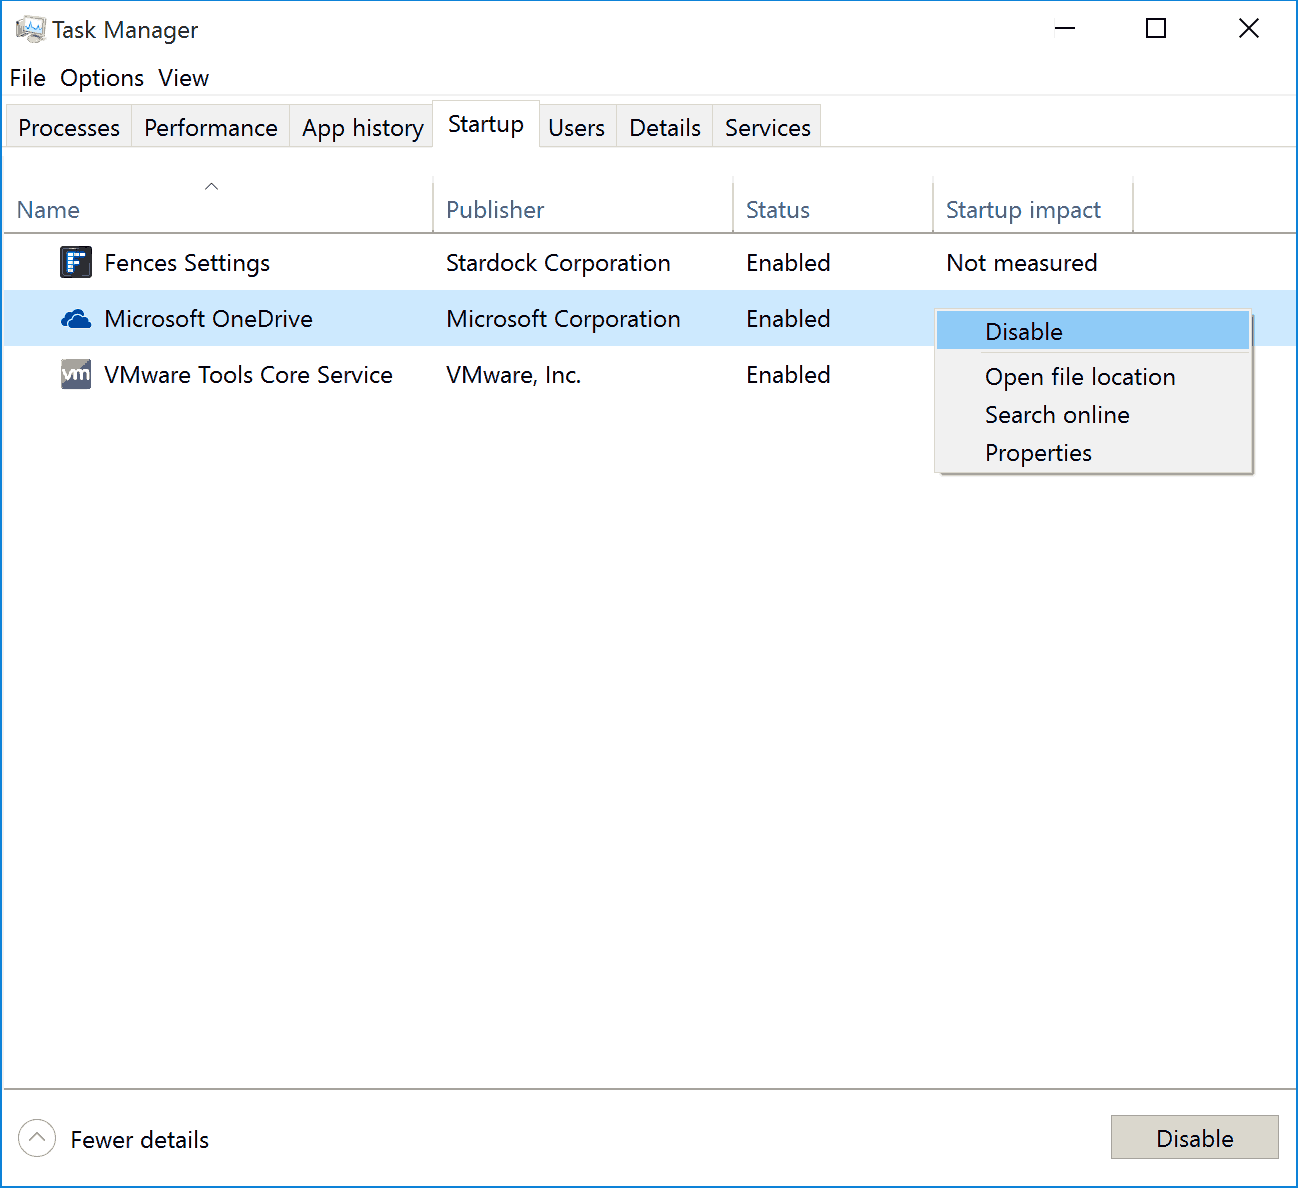 Disable the applications you don't use often from this list.